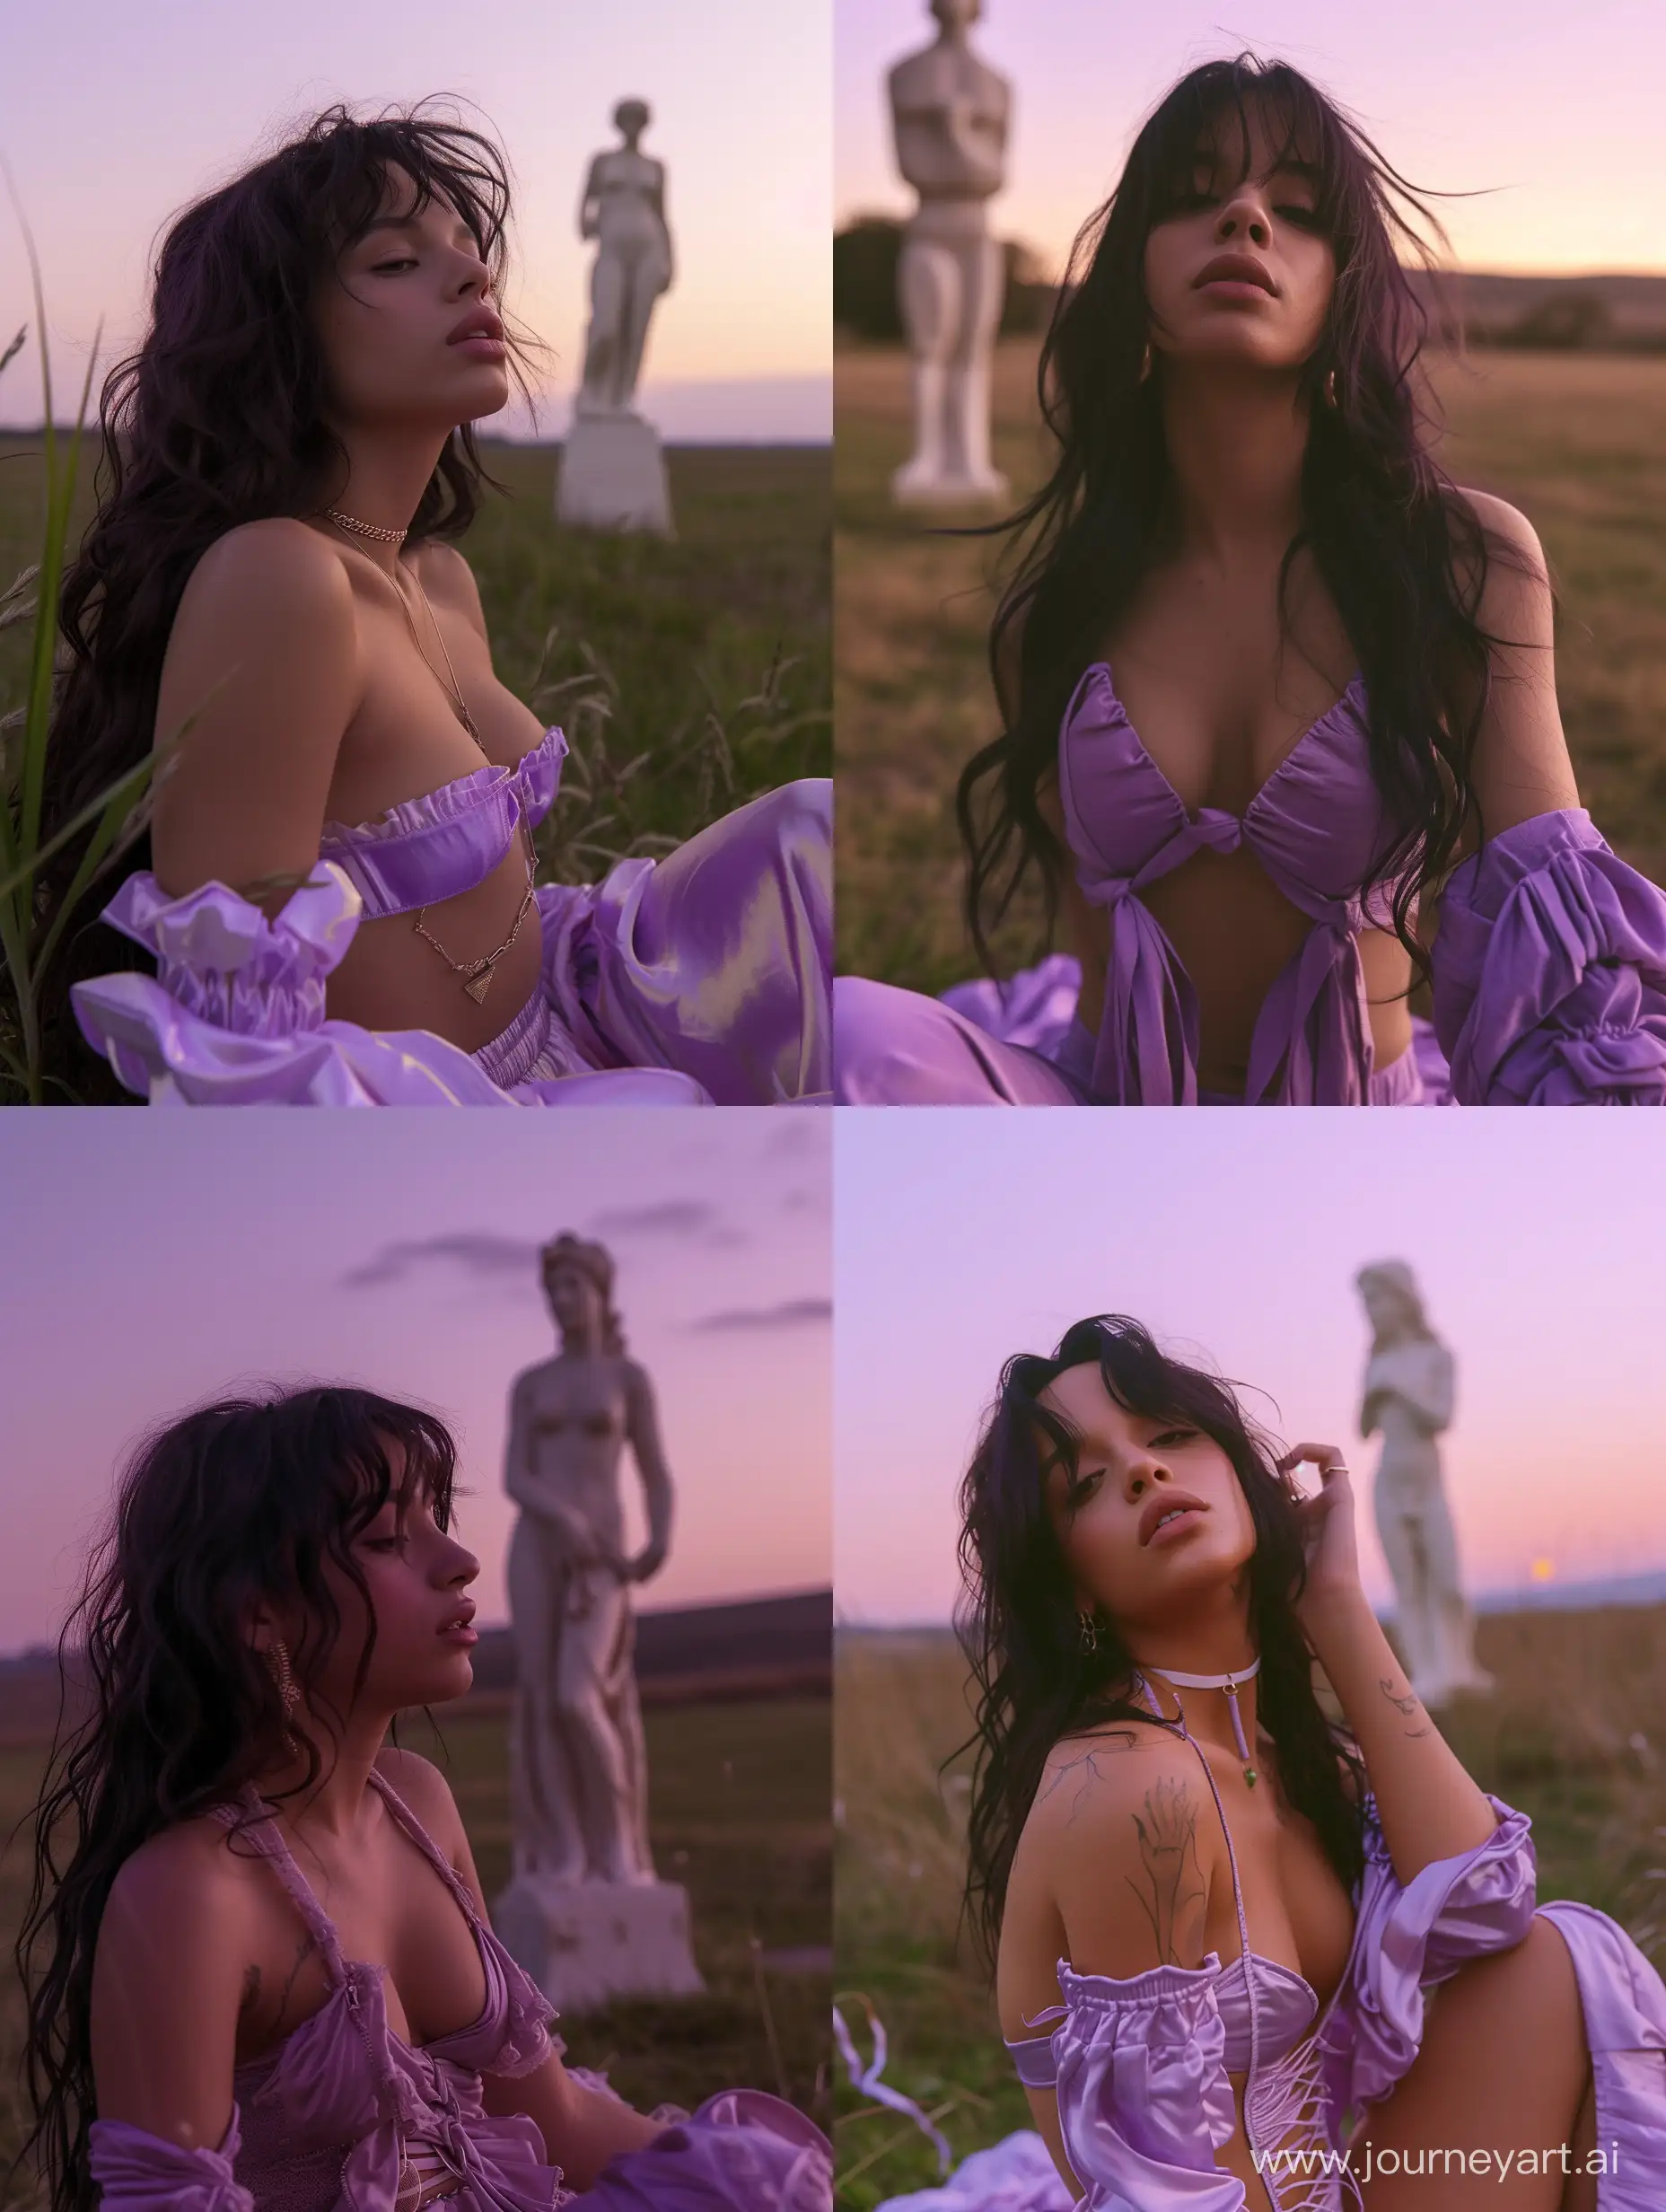 purple sunrise, open field, realistic Camila 'dark-hair'   Cabello, she is blushing, figure-wrapping street outfit, she sits looking at herself, ivory statue in the background, close-up view of Camila's ynoic folds